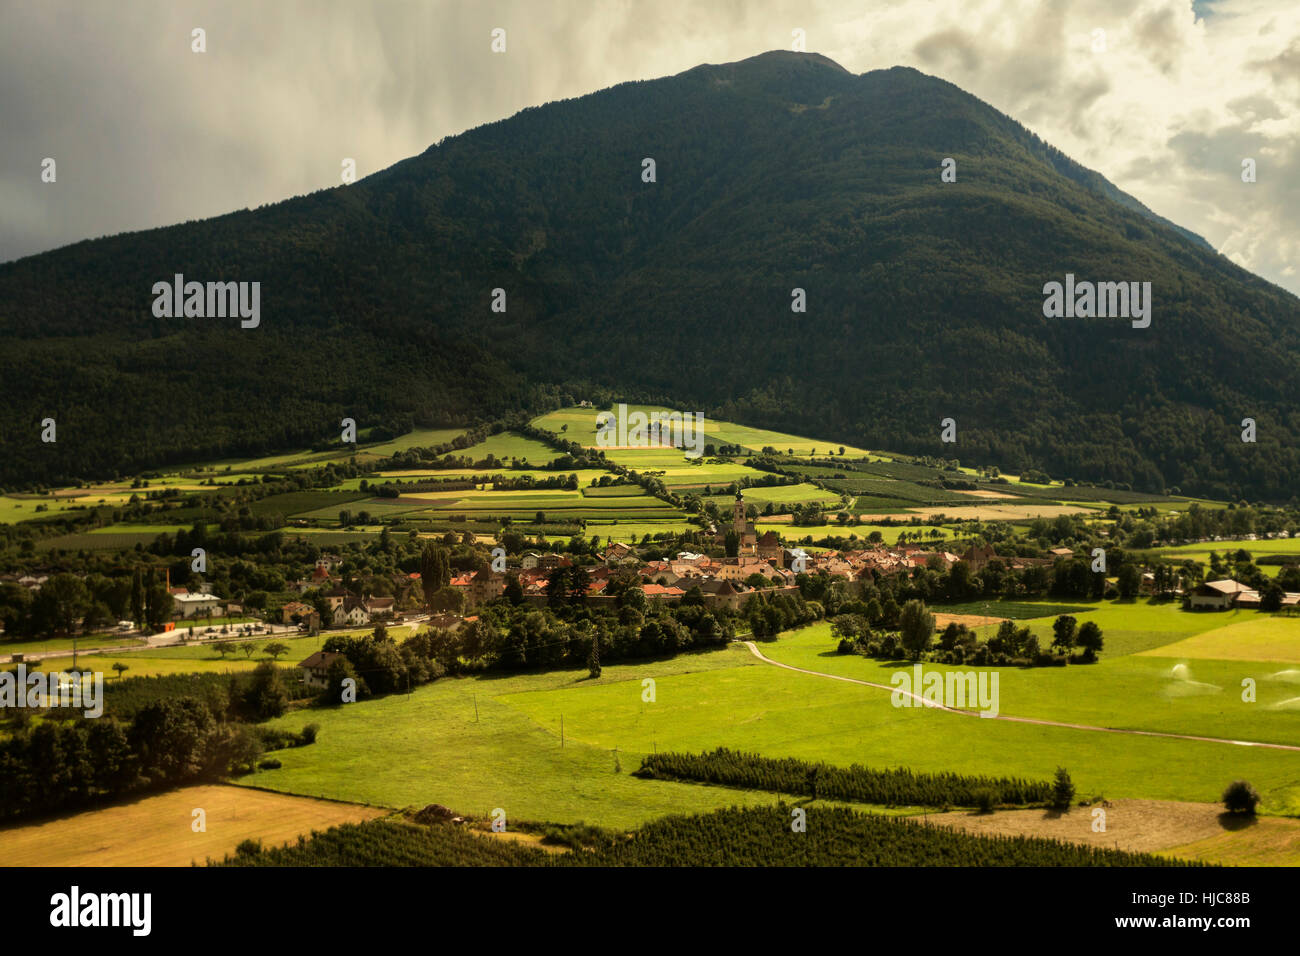 Distant view of village in Vinschgau Valley, South Tyrol, Italy Stock Photo